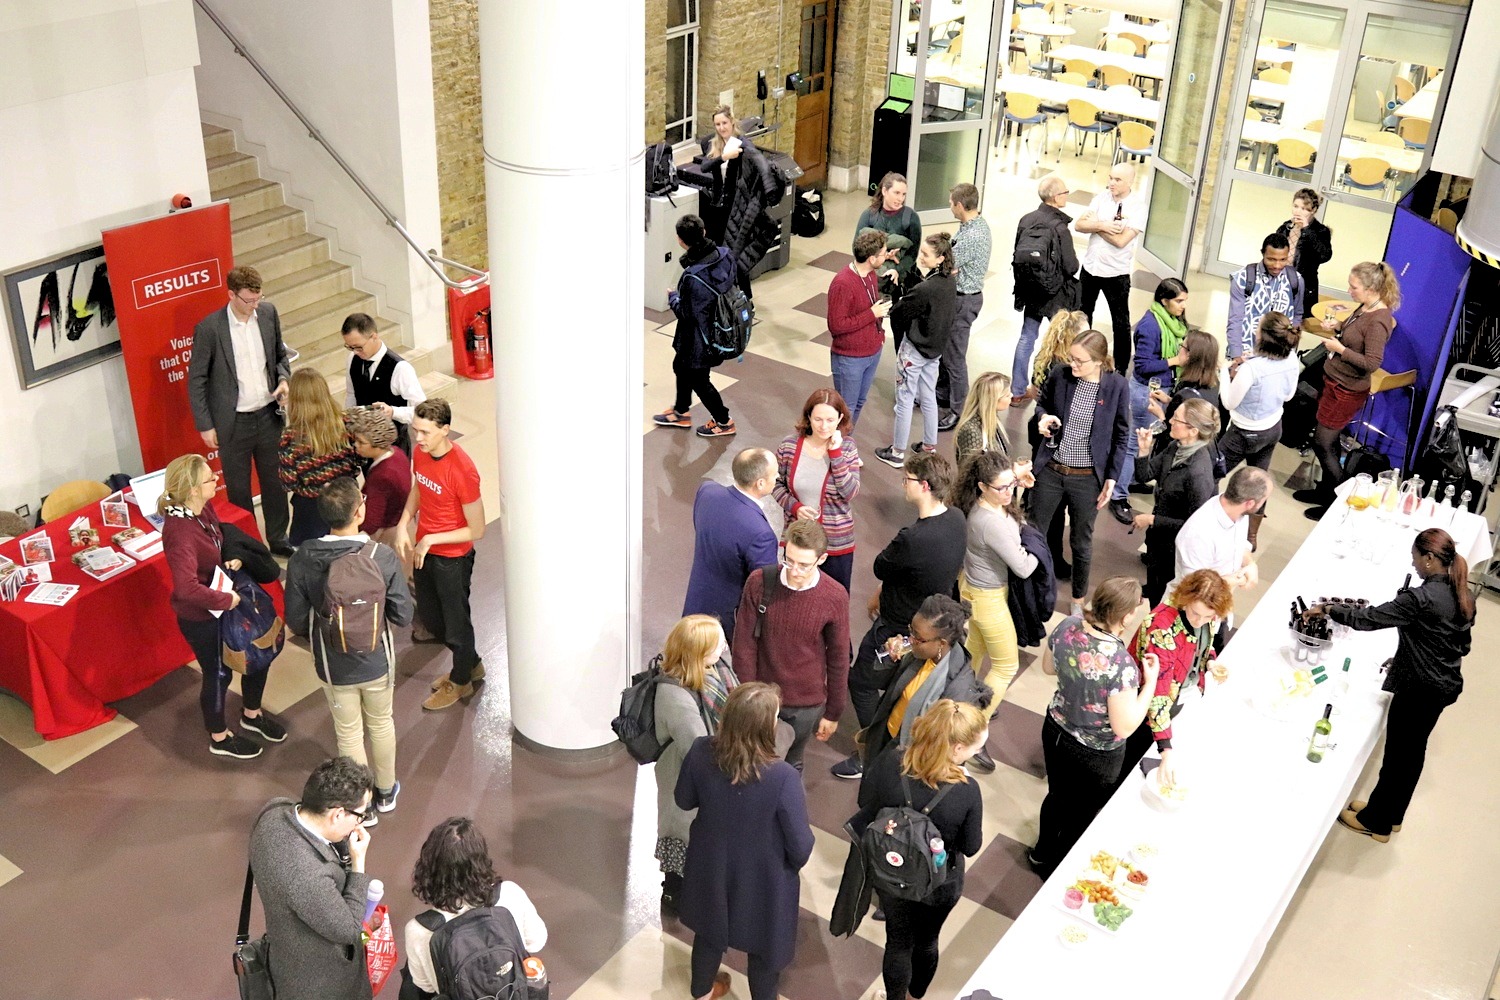 The reception at the LSHTM